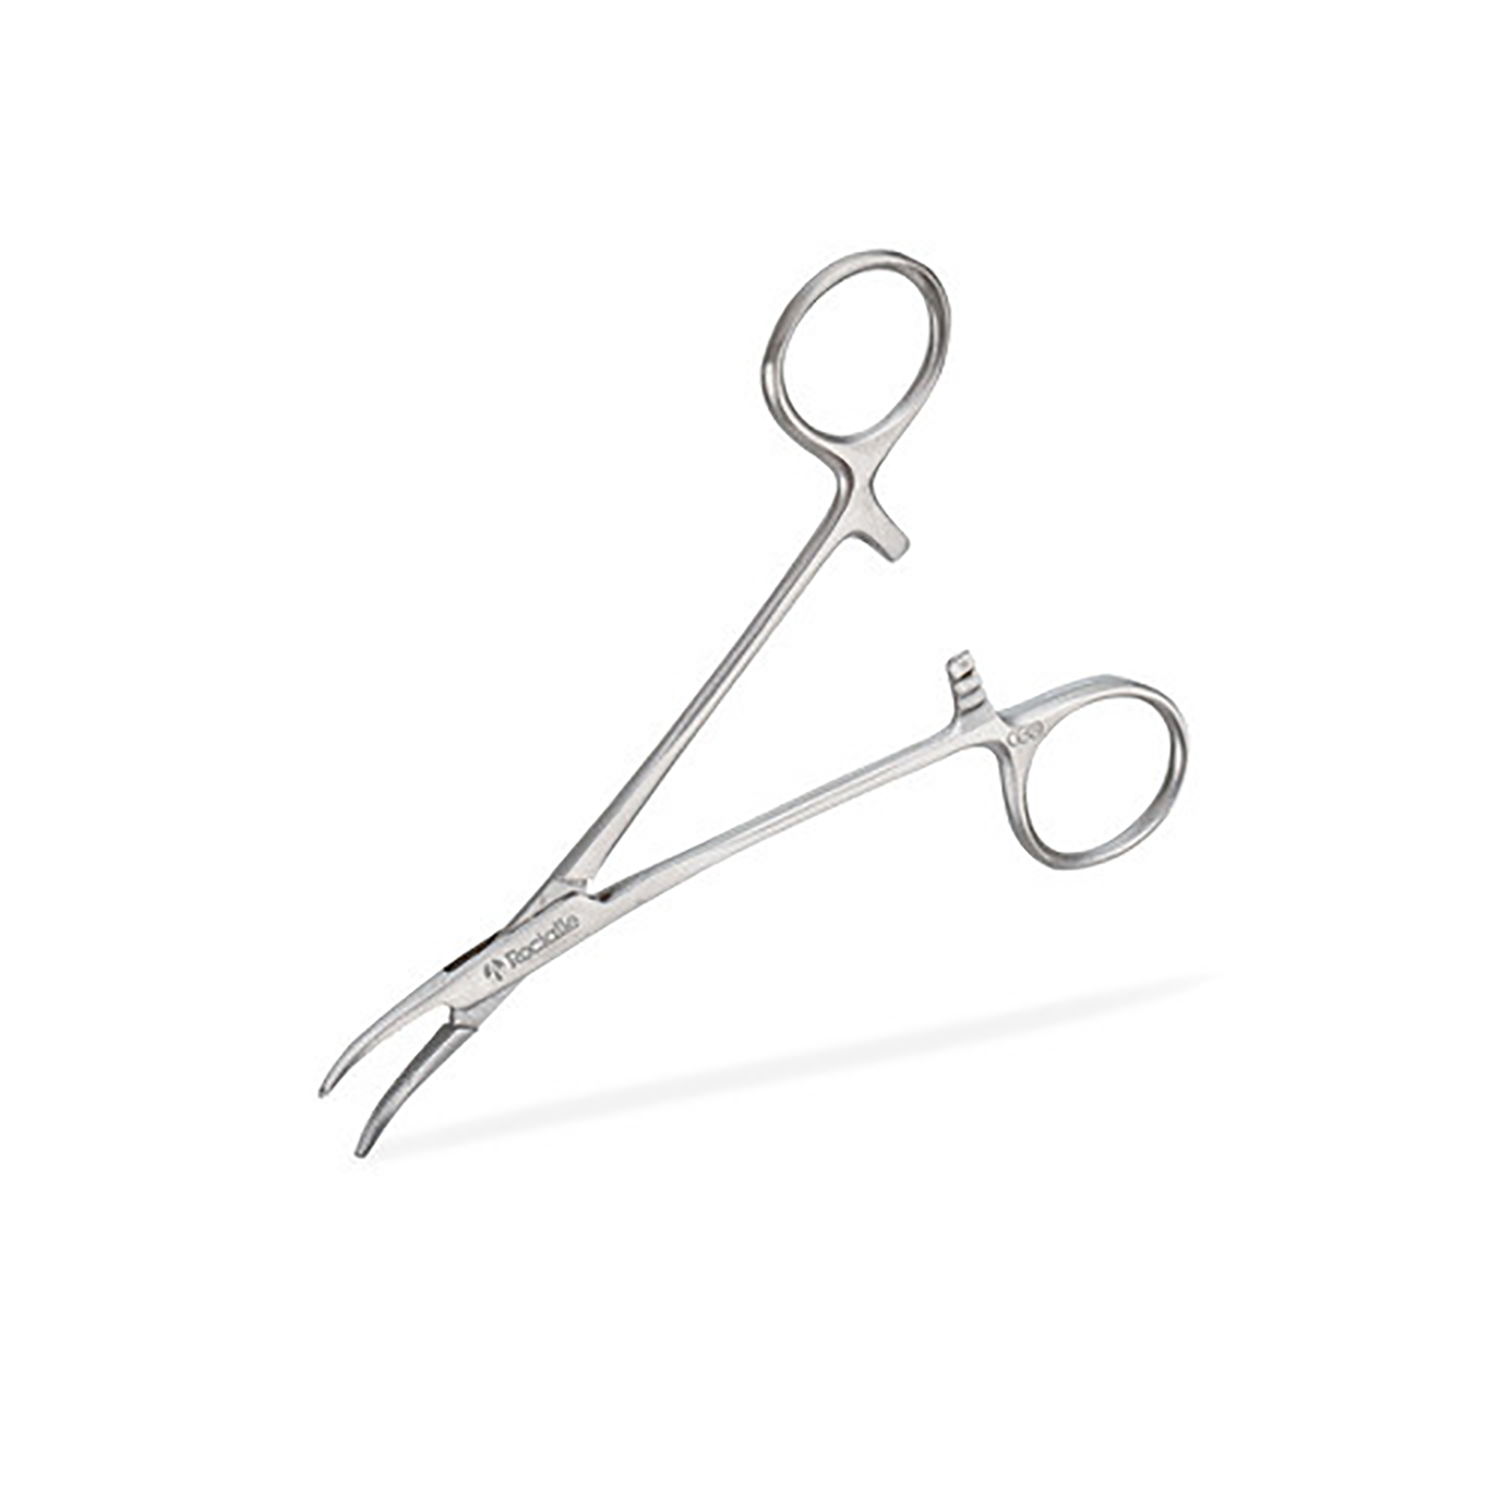 Rocialle Halstead Mosquito Artery Forceps | Curved | 12.5cm | Single